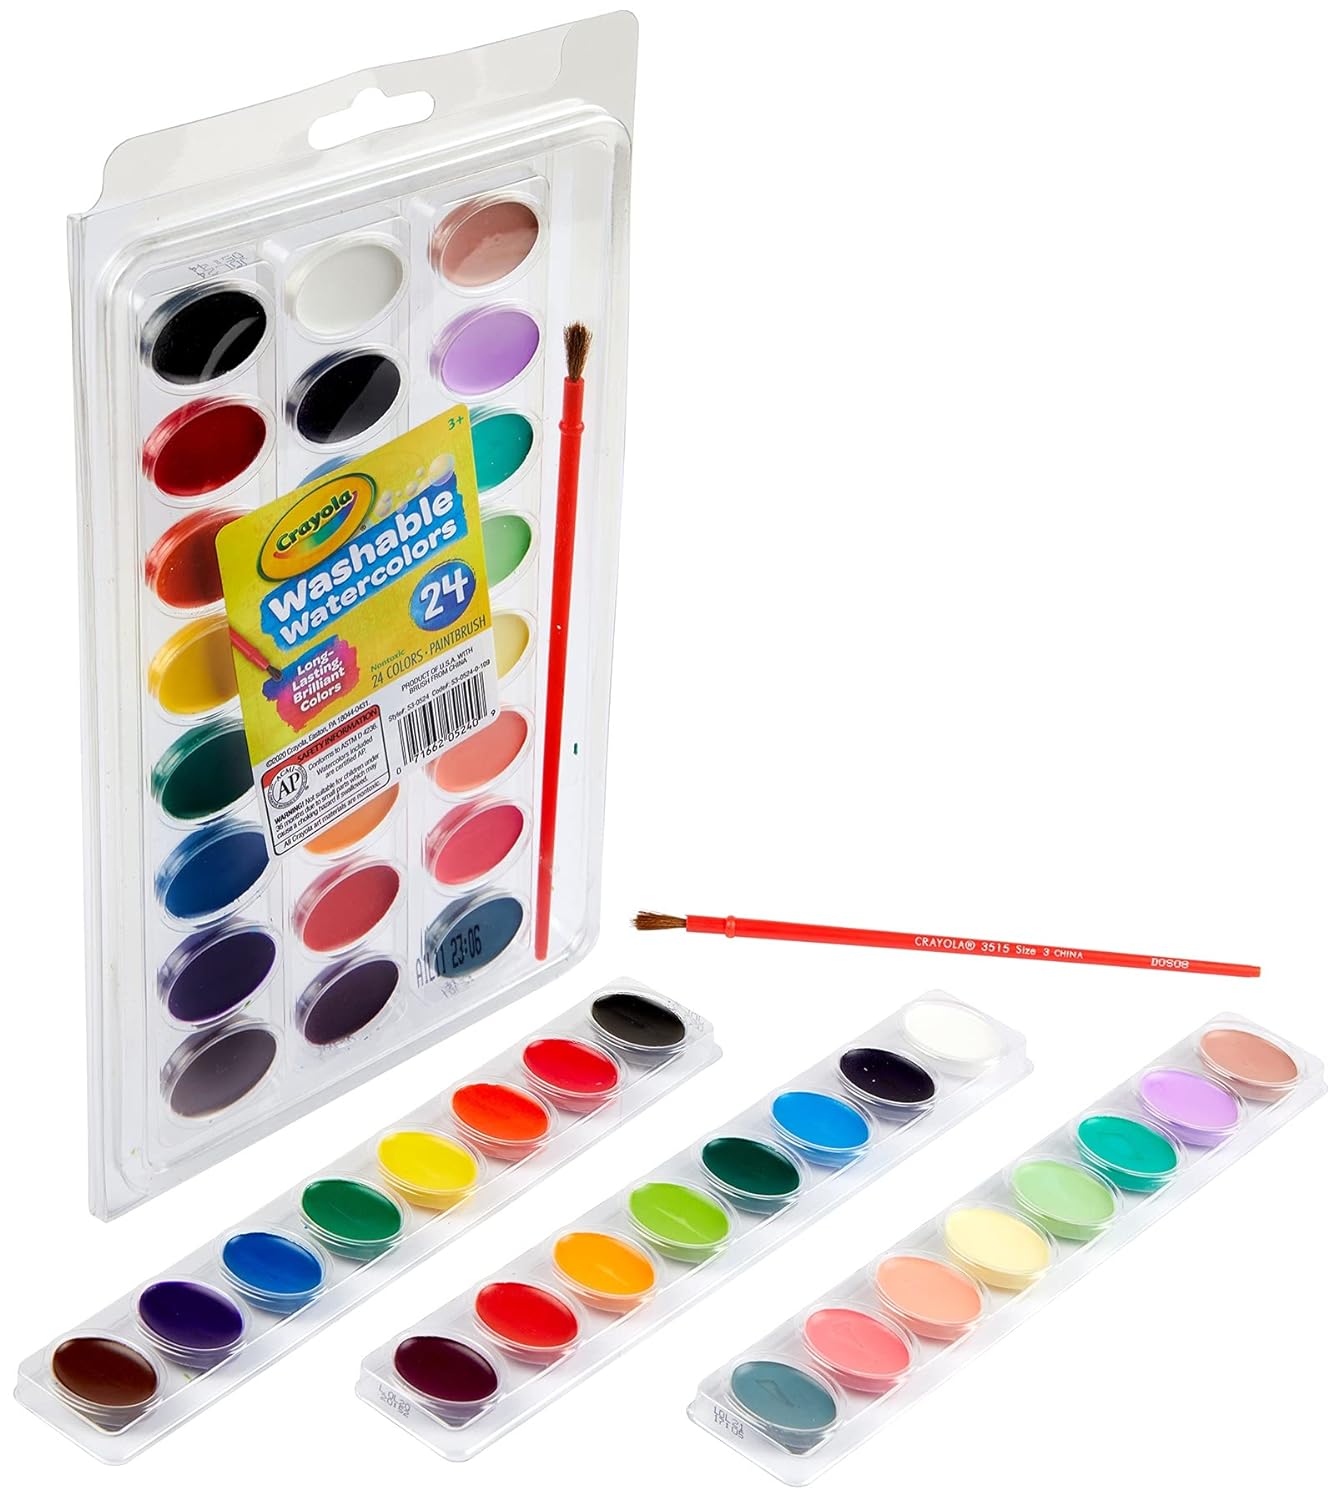 Crayola Washable Watercolors - Pack of 24